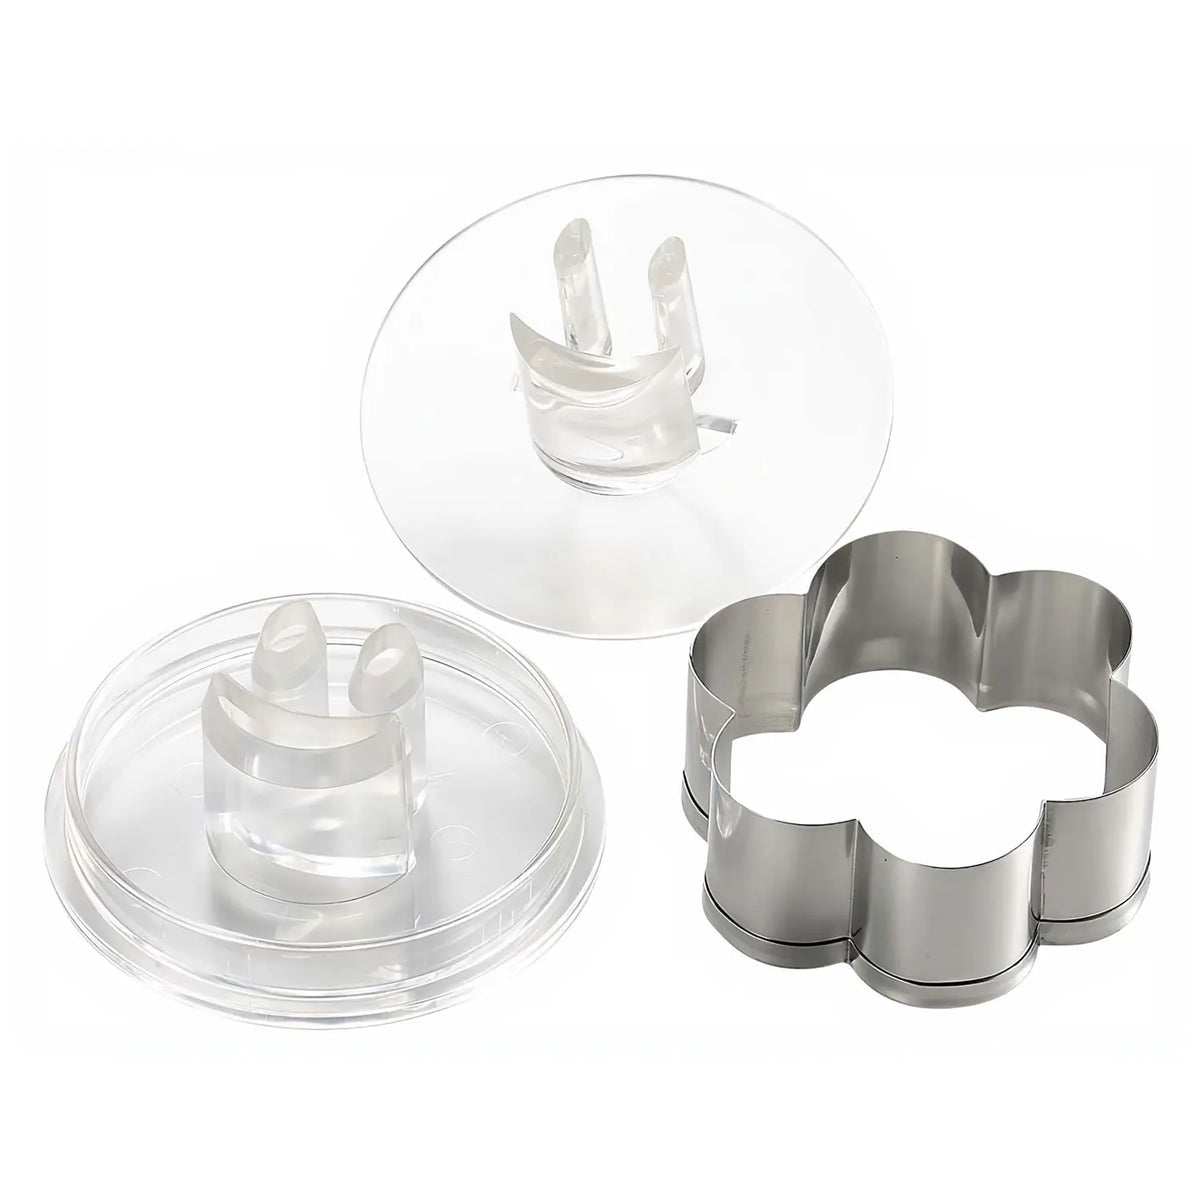 TIGERCROWN Cake Land Stainless Steel Flower Cookie Cutter